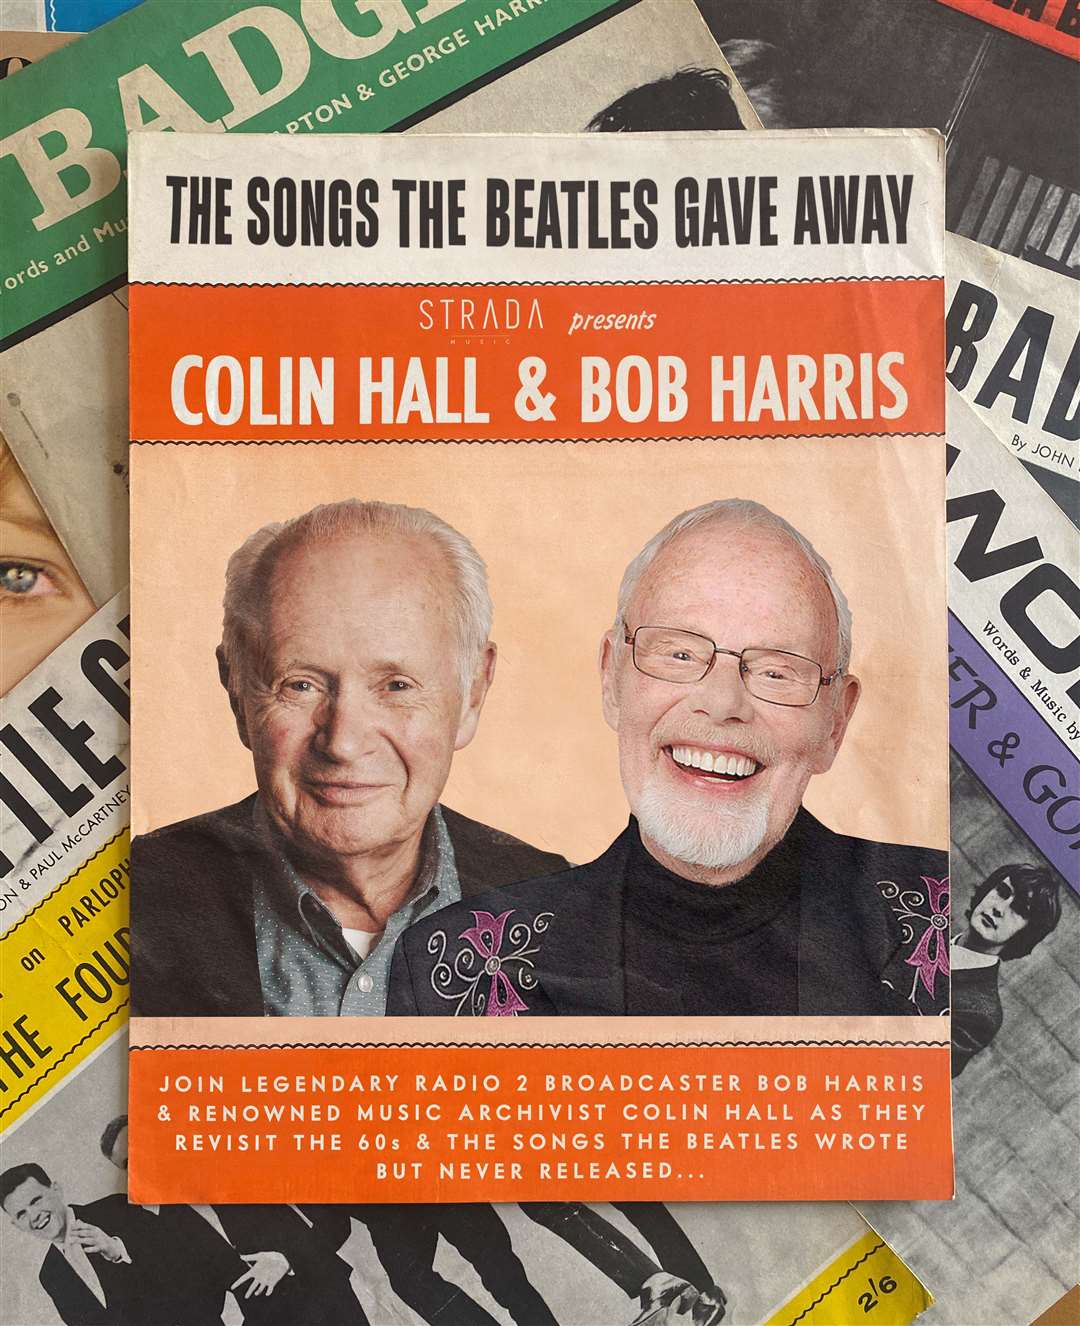 Bob Harris and Colin Hall will talk about The Beatles at St Margaret's Braemar.